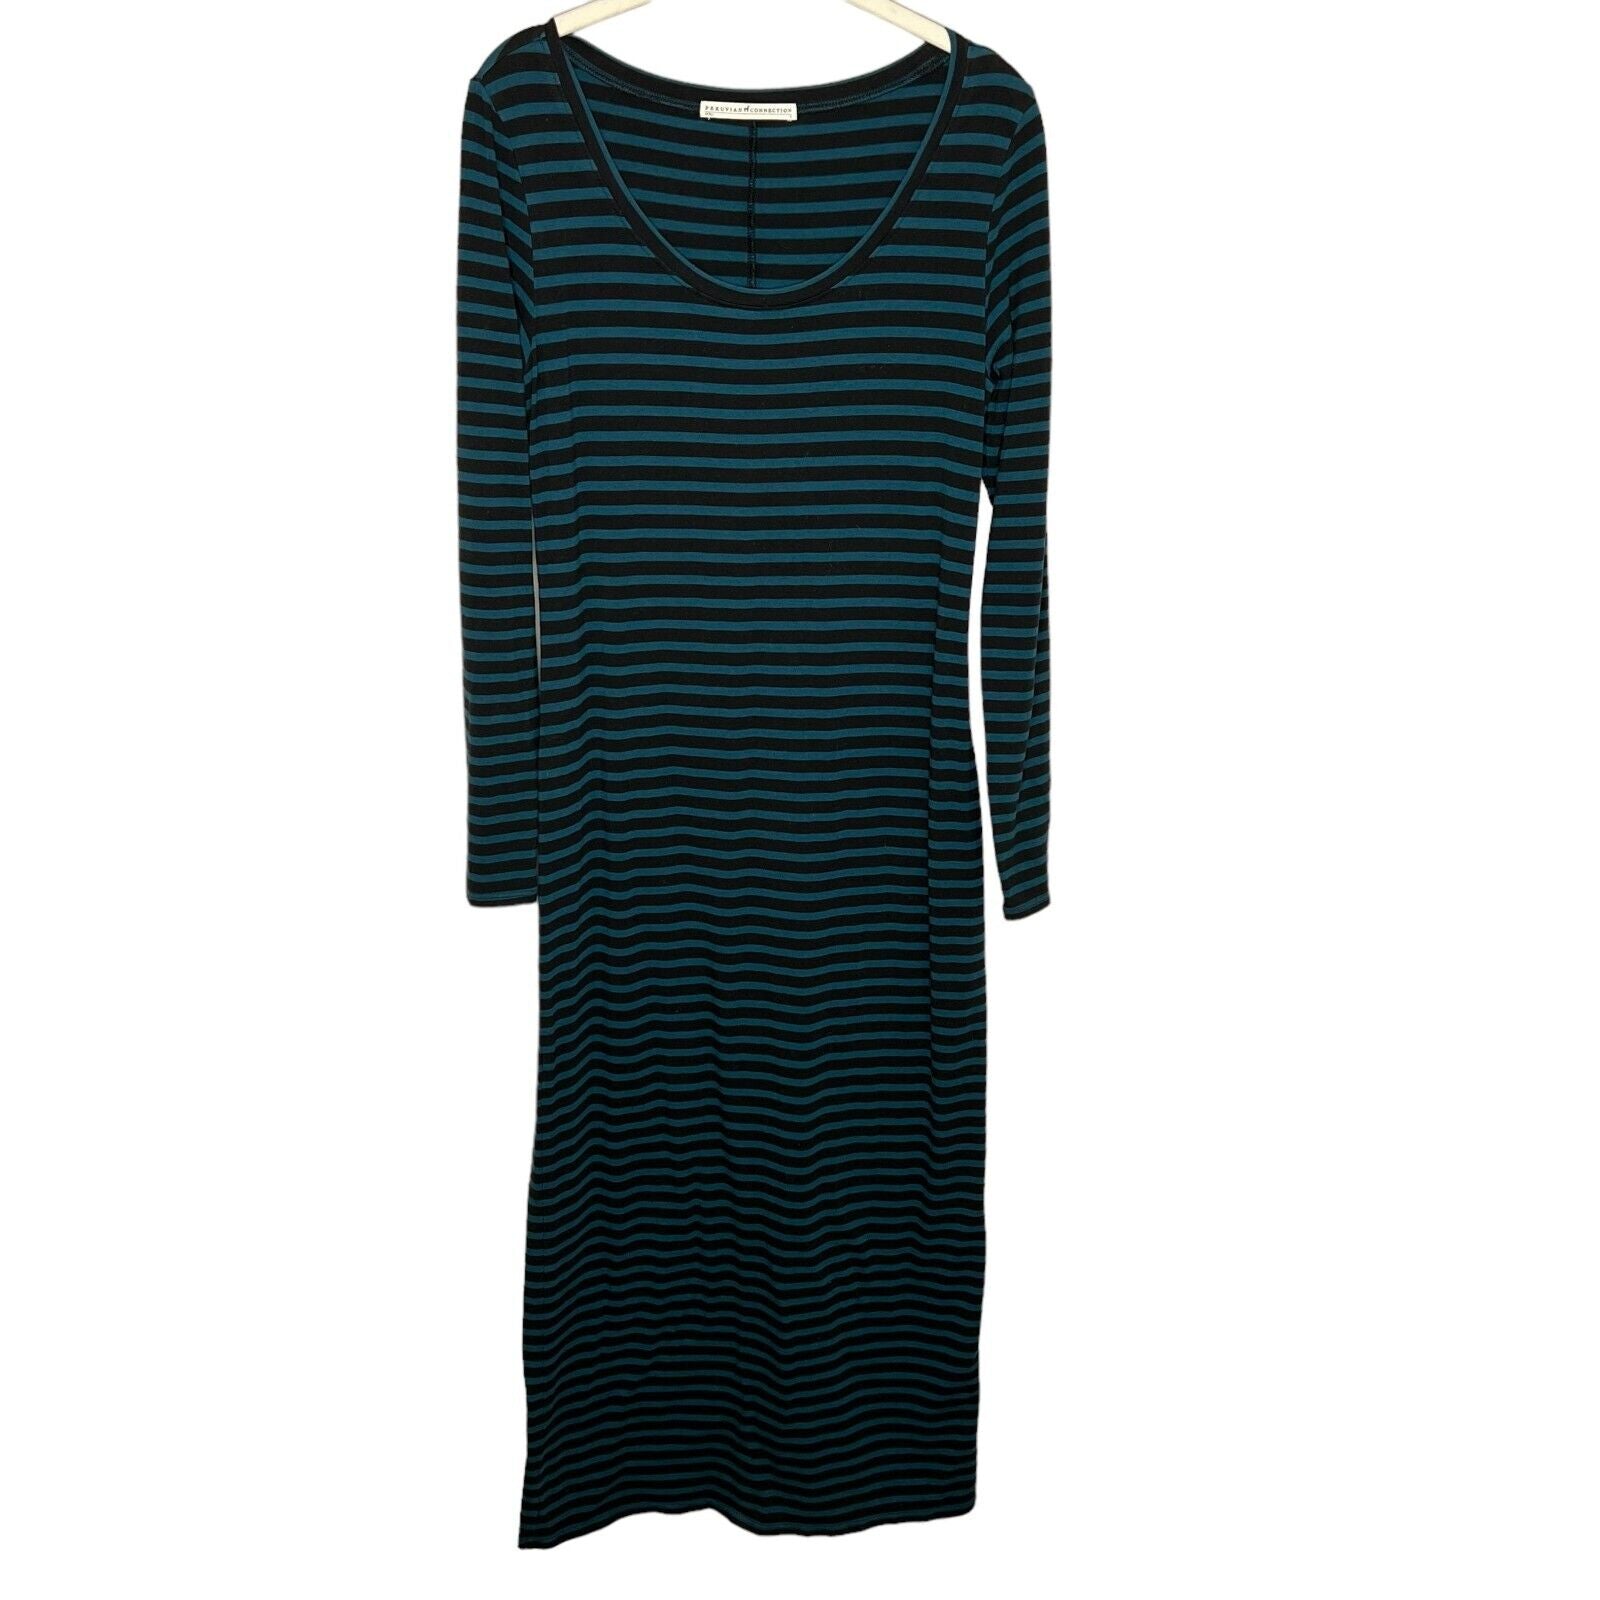 Peruvian Connection Andover Striped Long Sleeve Maxi Dress Size Small